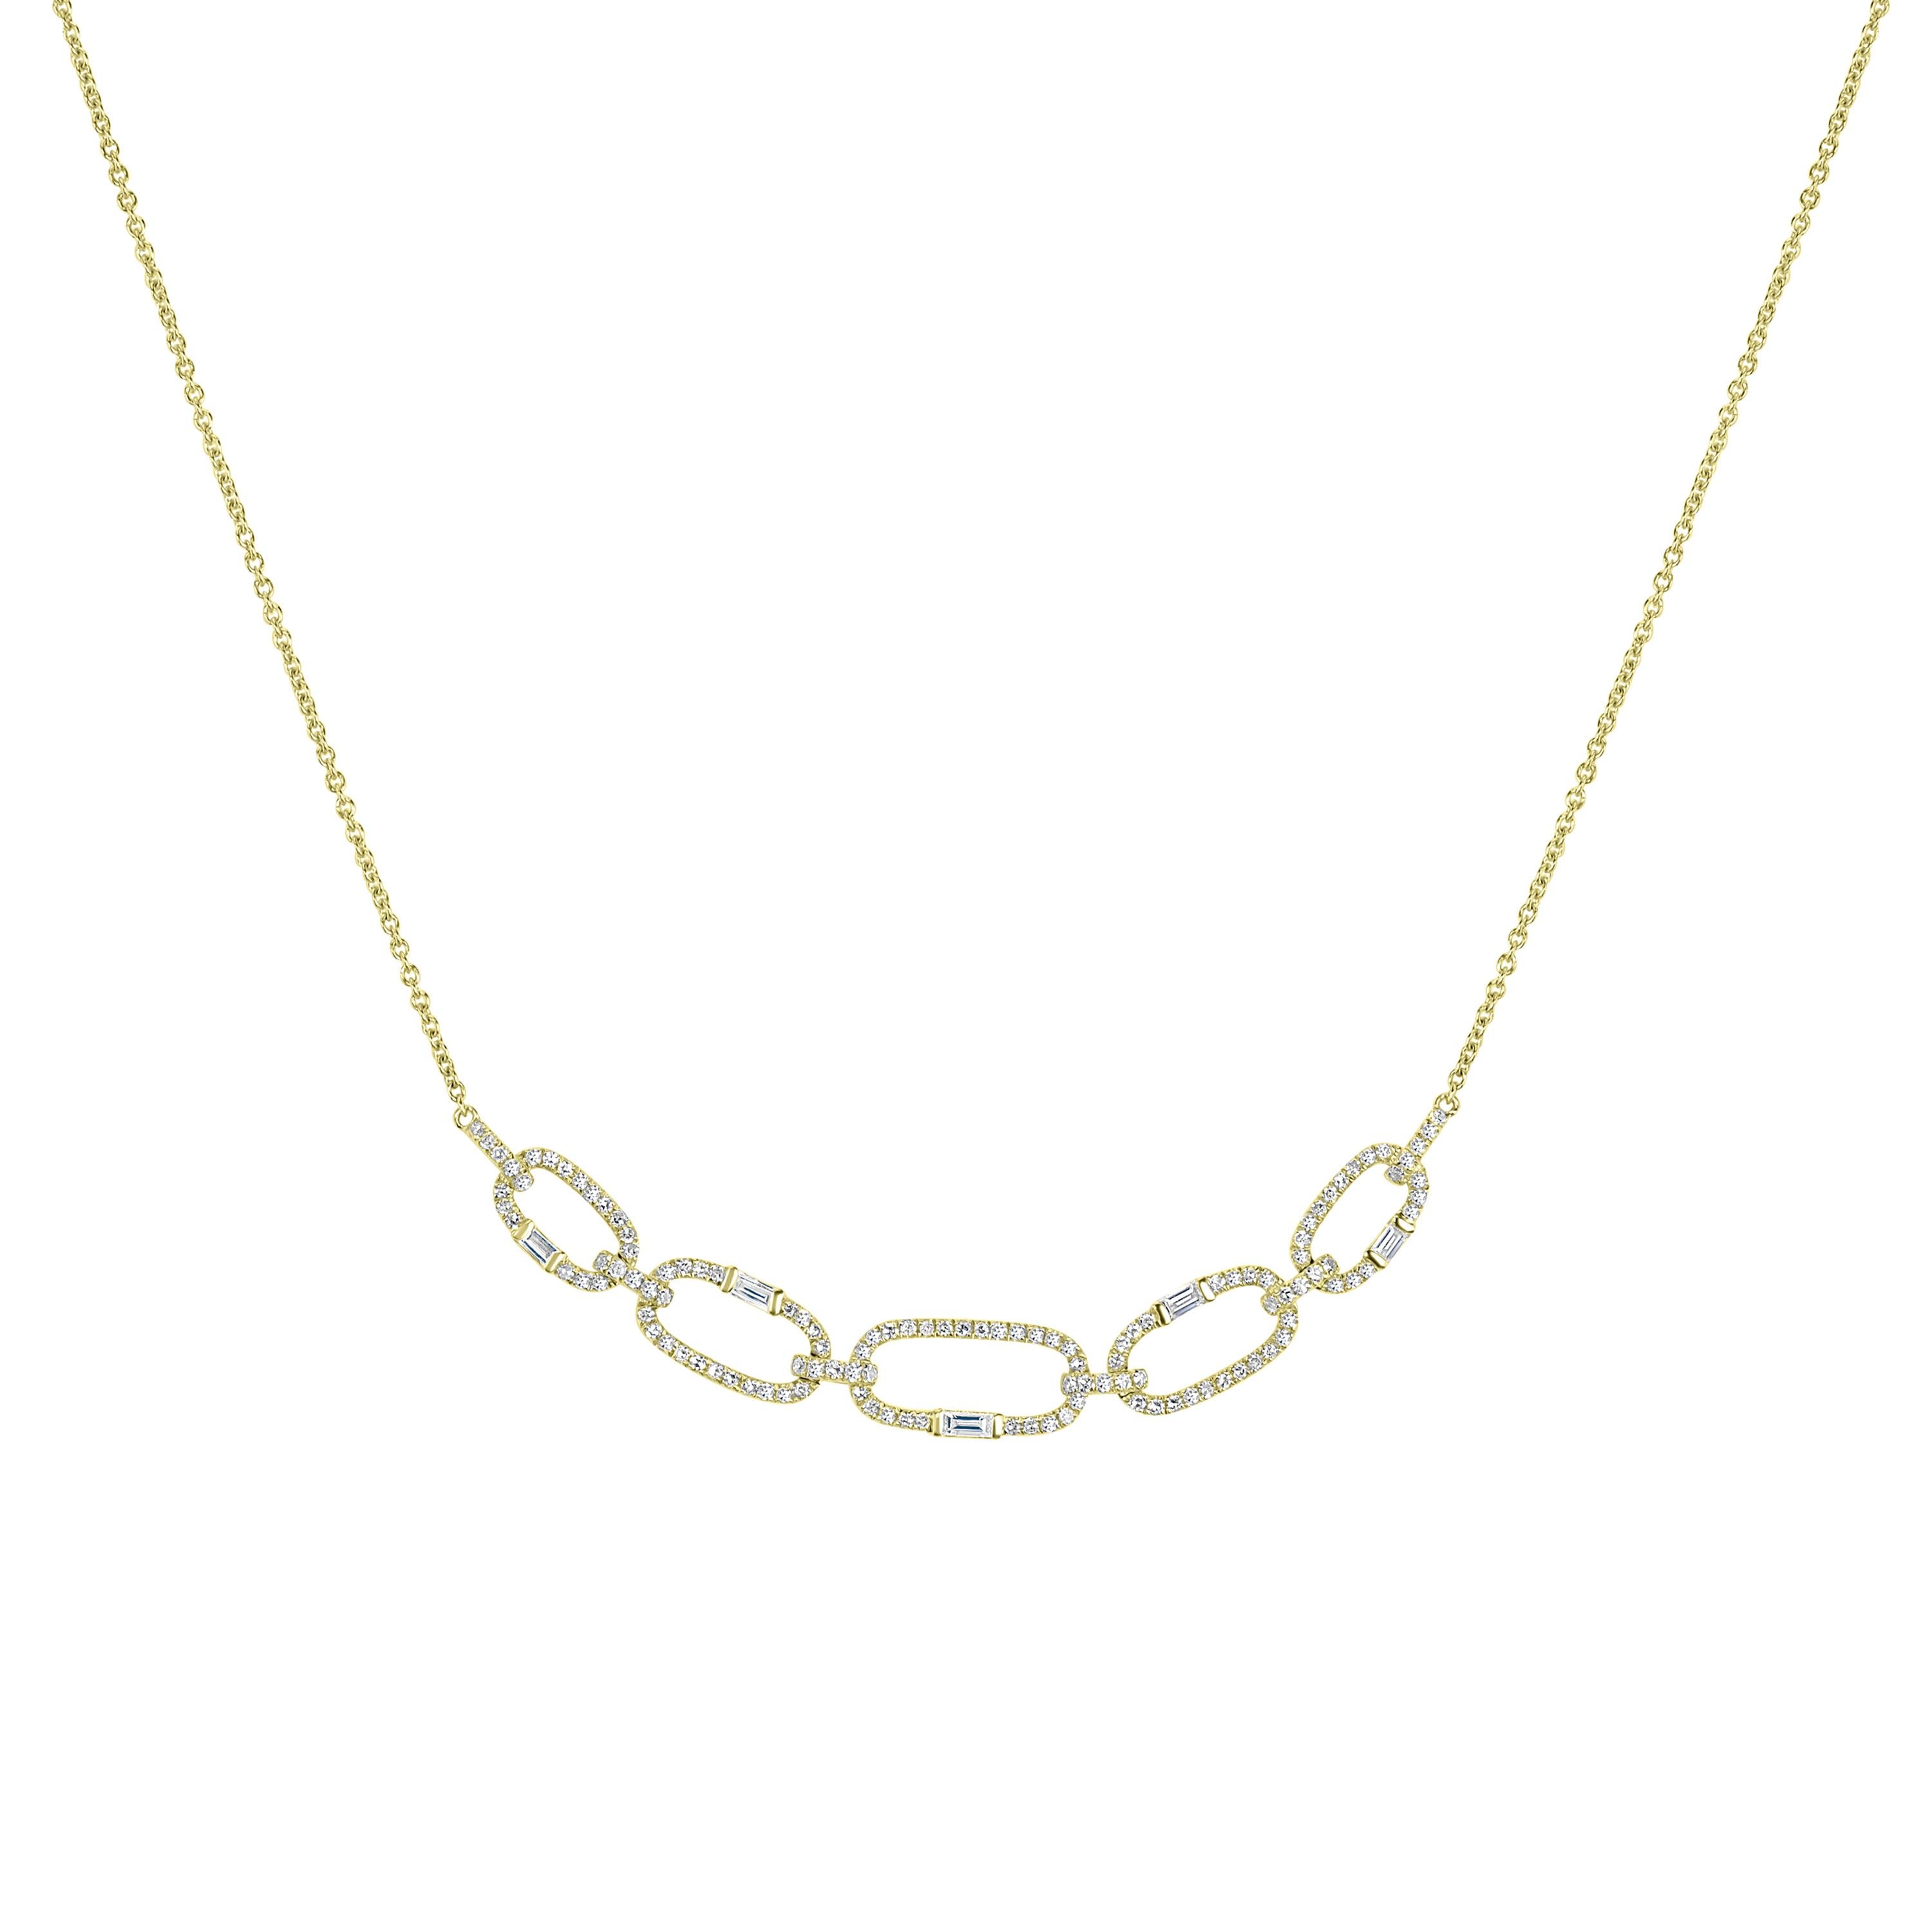 Round Cut Luxle 0.5cttw. Diamond Link Chain Necklace in 18k Yellow Gold For Sale